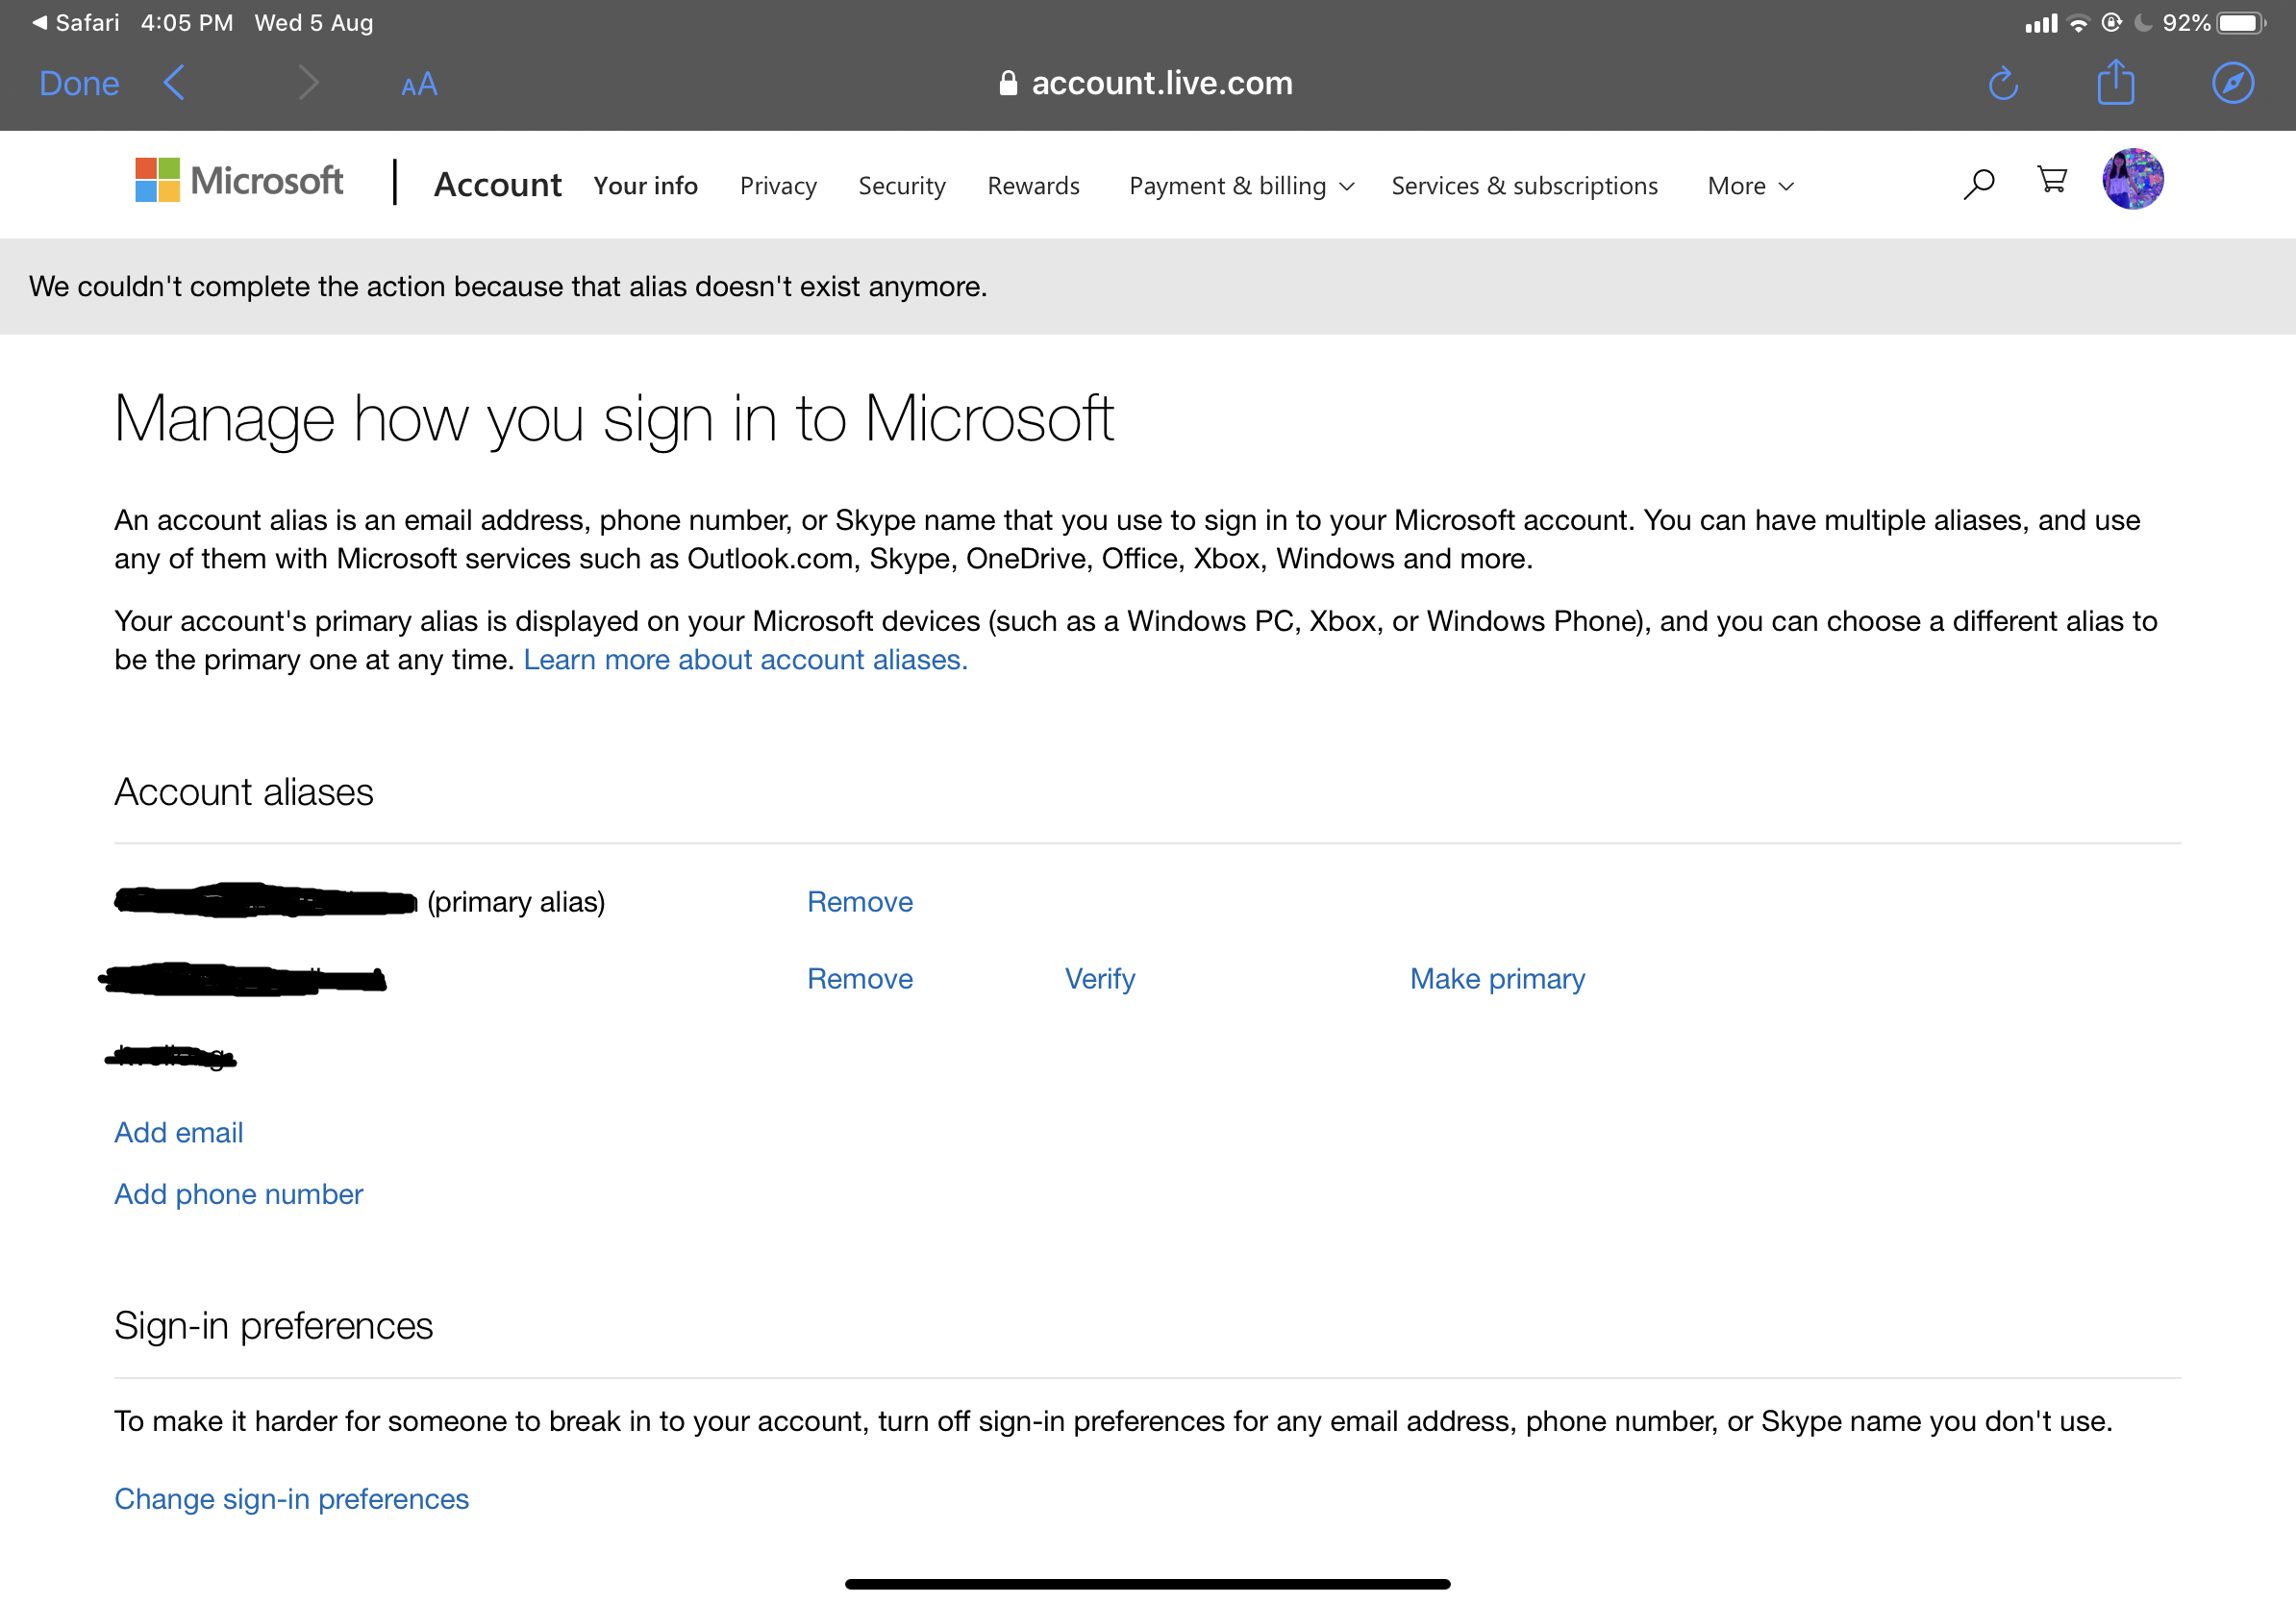 How to add an email address or phone number to your Microsoft account -  Microsoft Support